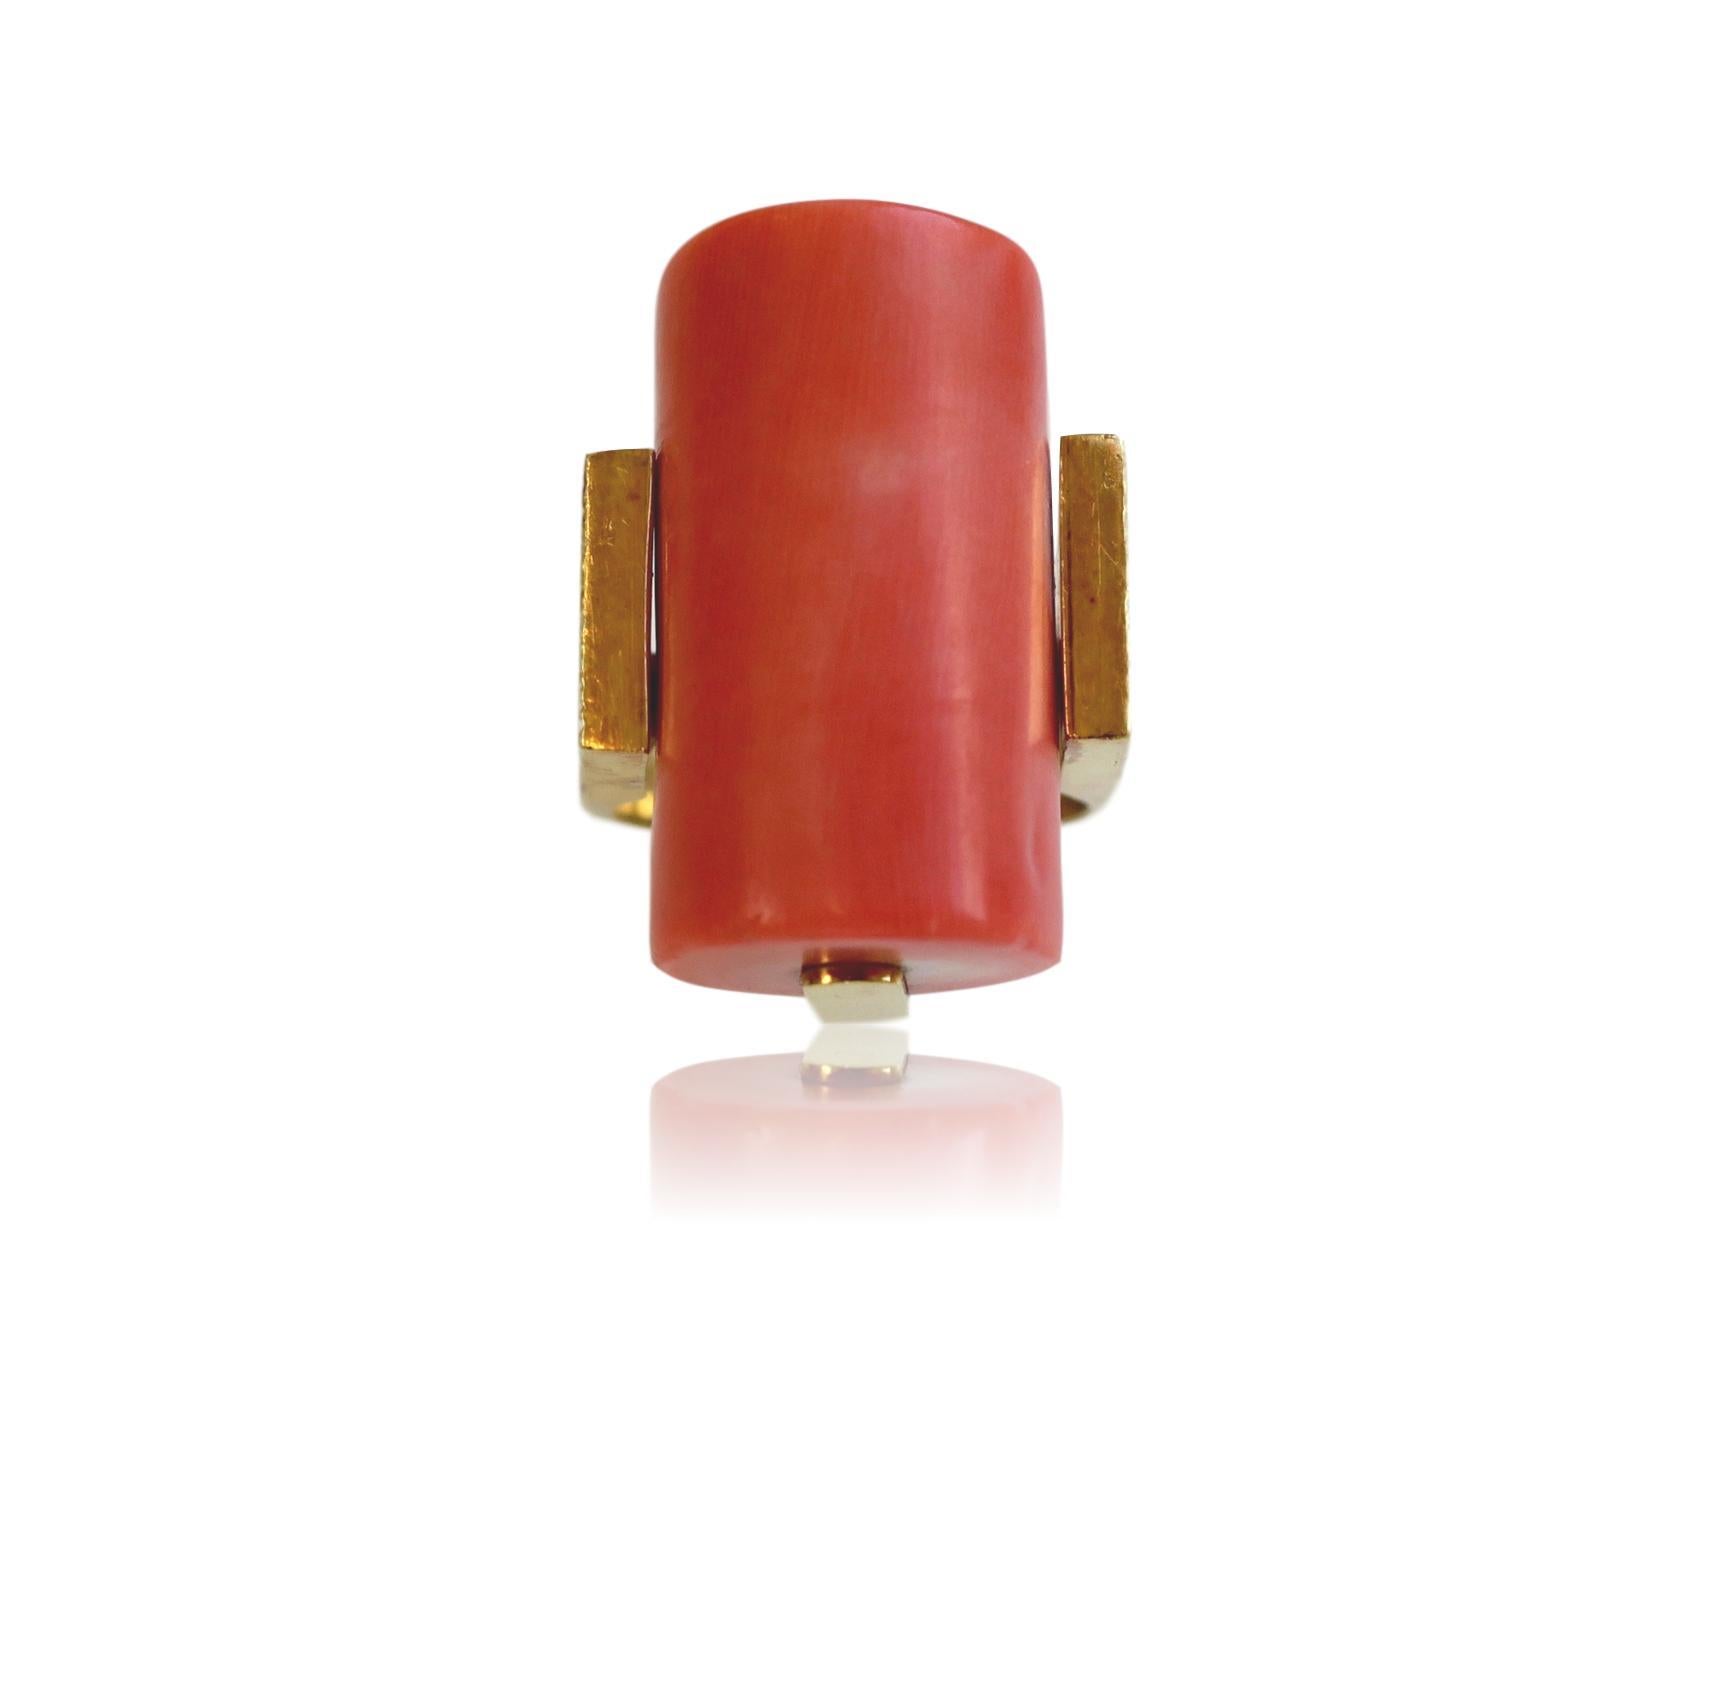 1970's Modernist coral and 18k yellow gold ring. The cylinder-shaped smooth polished coral (just under one inch)  mounted in a wood-grained 18k ring. This coral ring is a very flattering pinkish- orange, the extended shank gives the ring a super